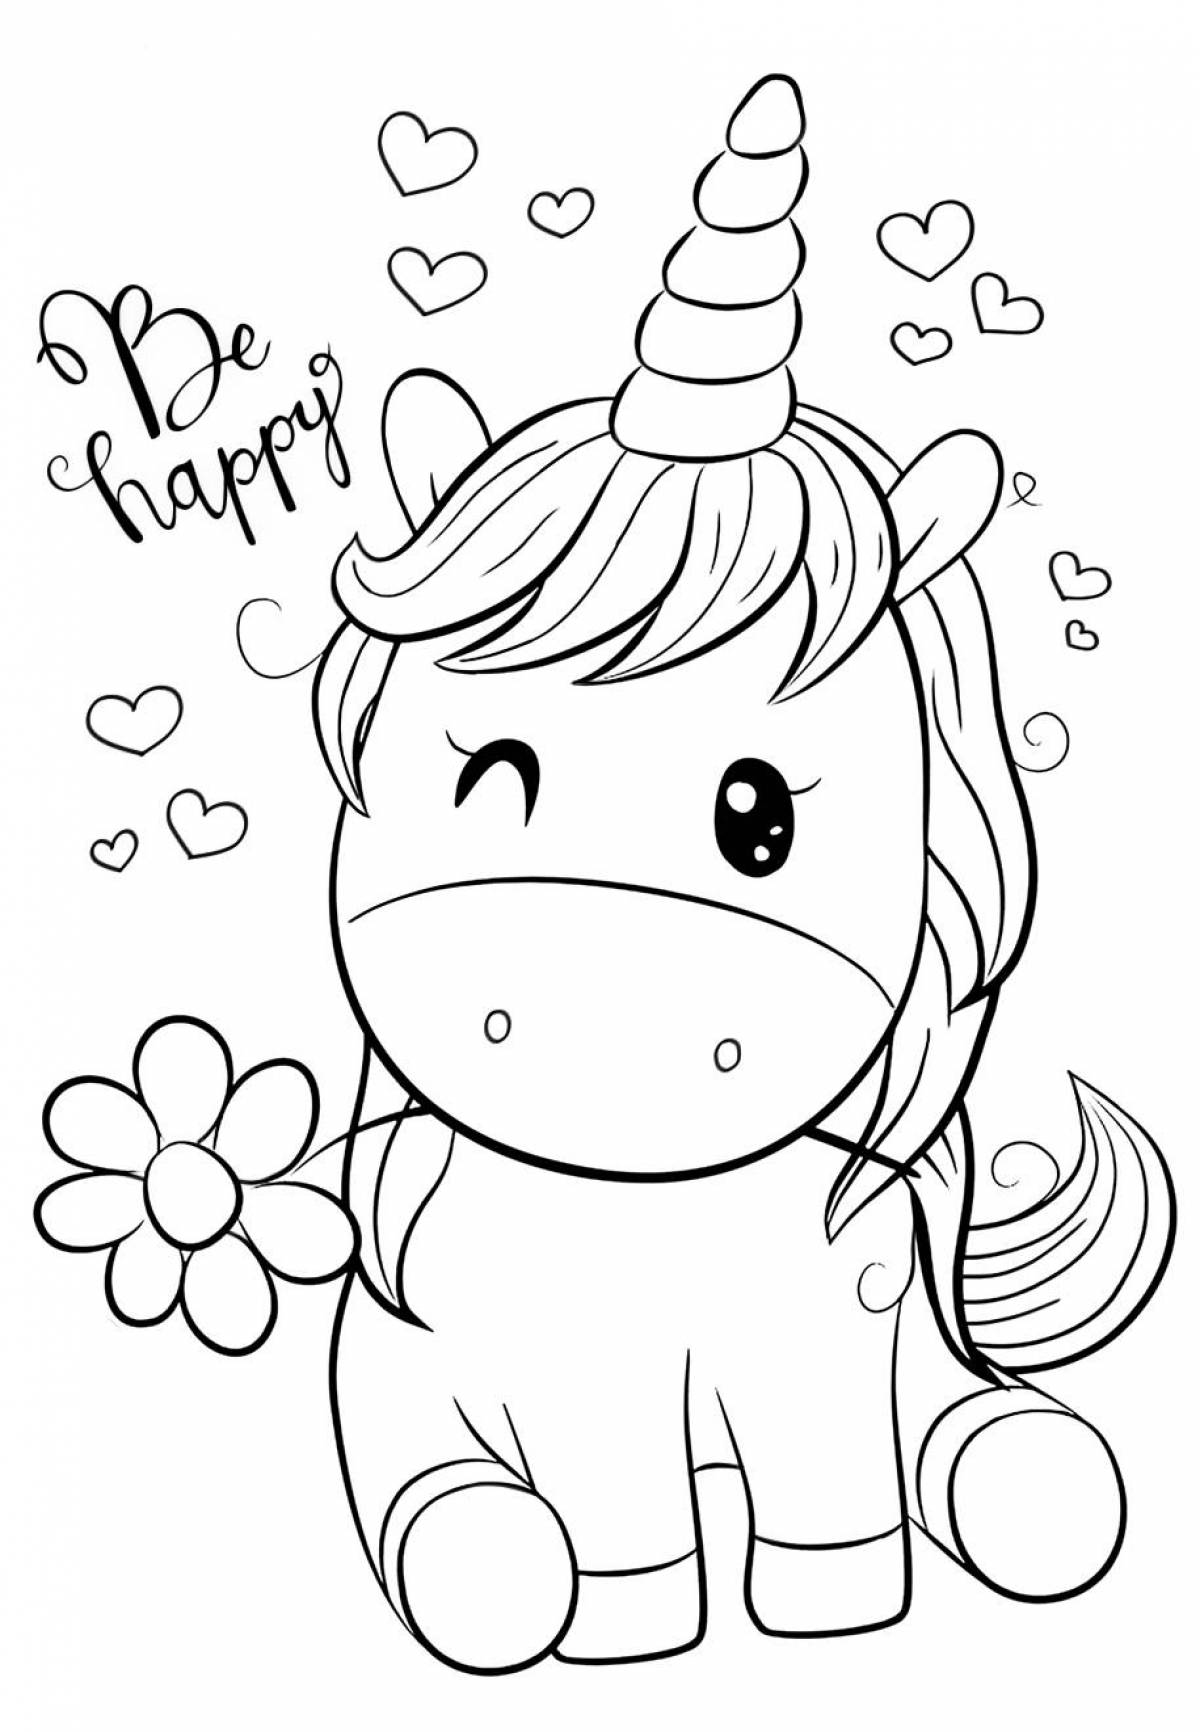 Adorable unicorn coloring book for kids 4-5 years old